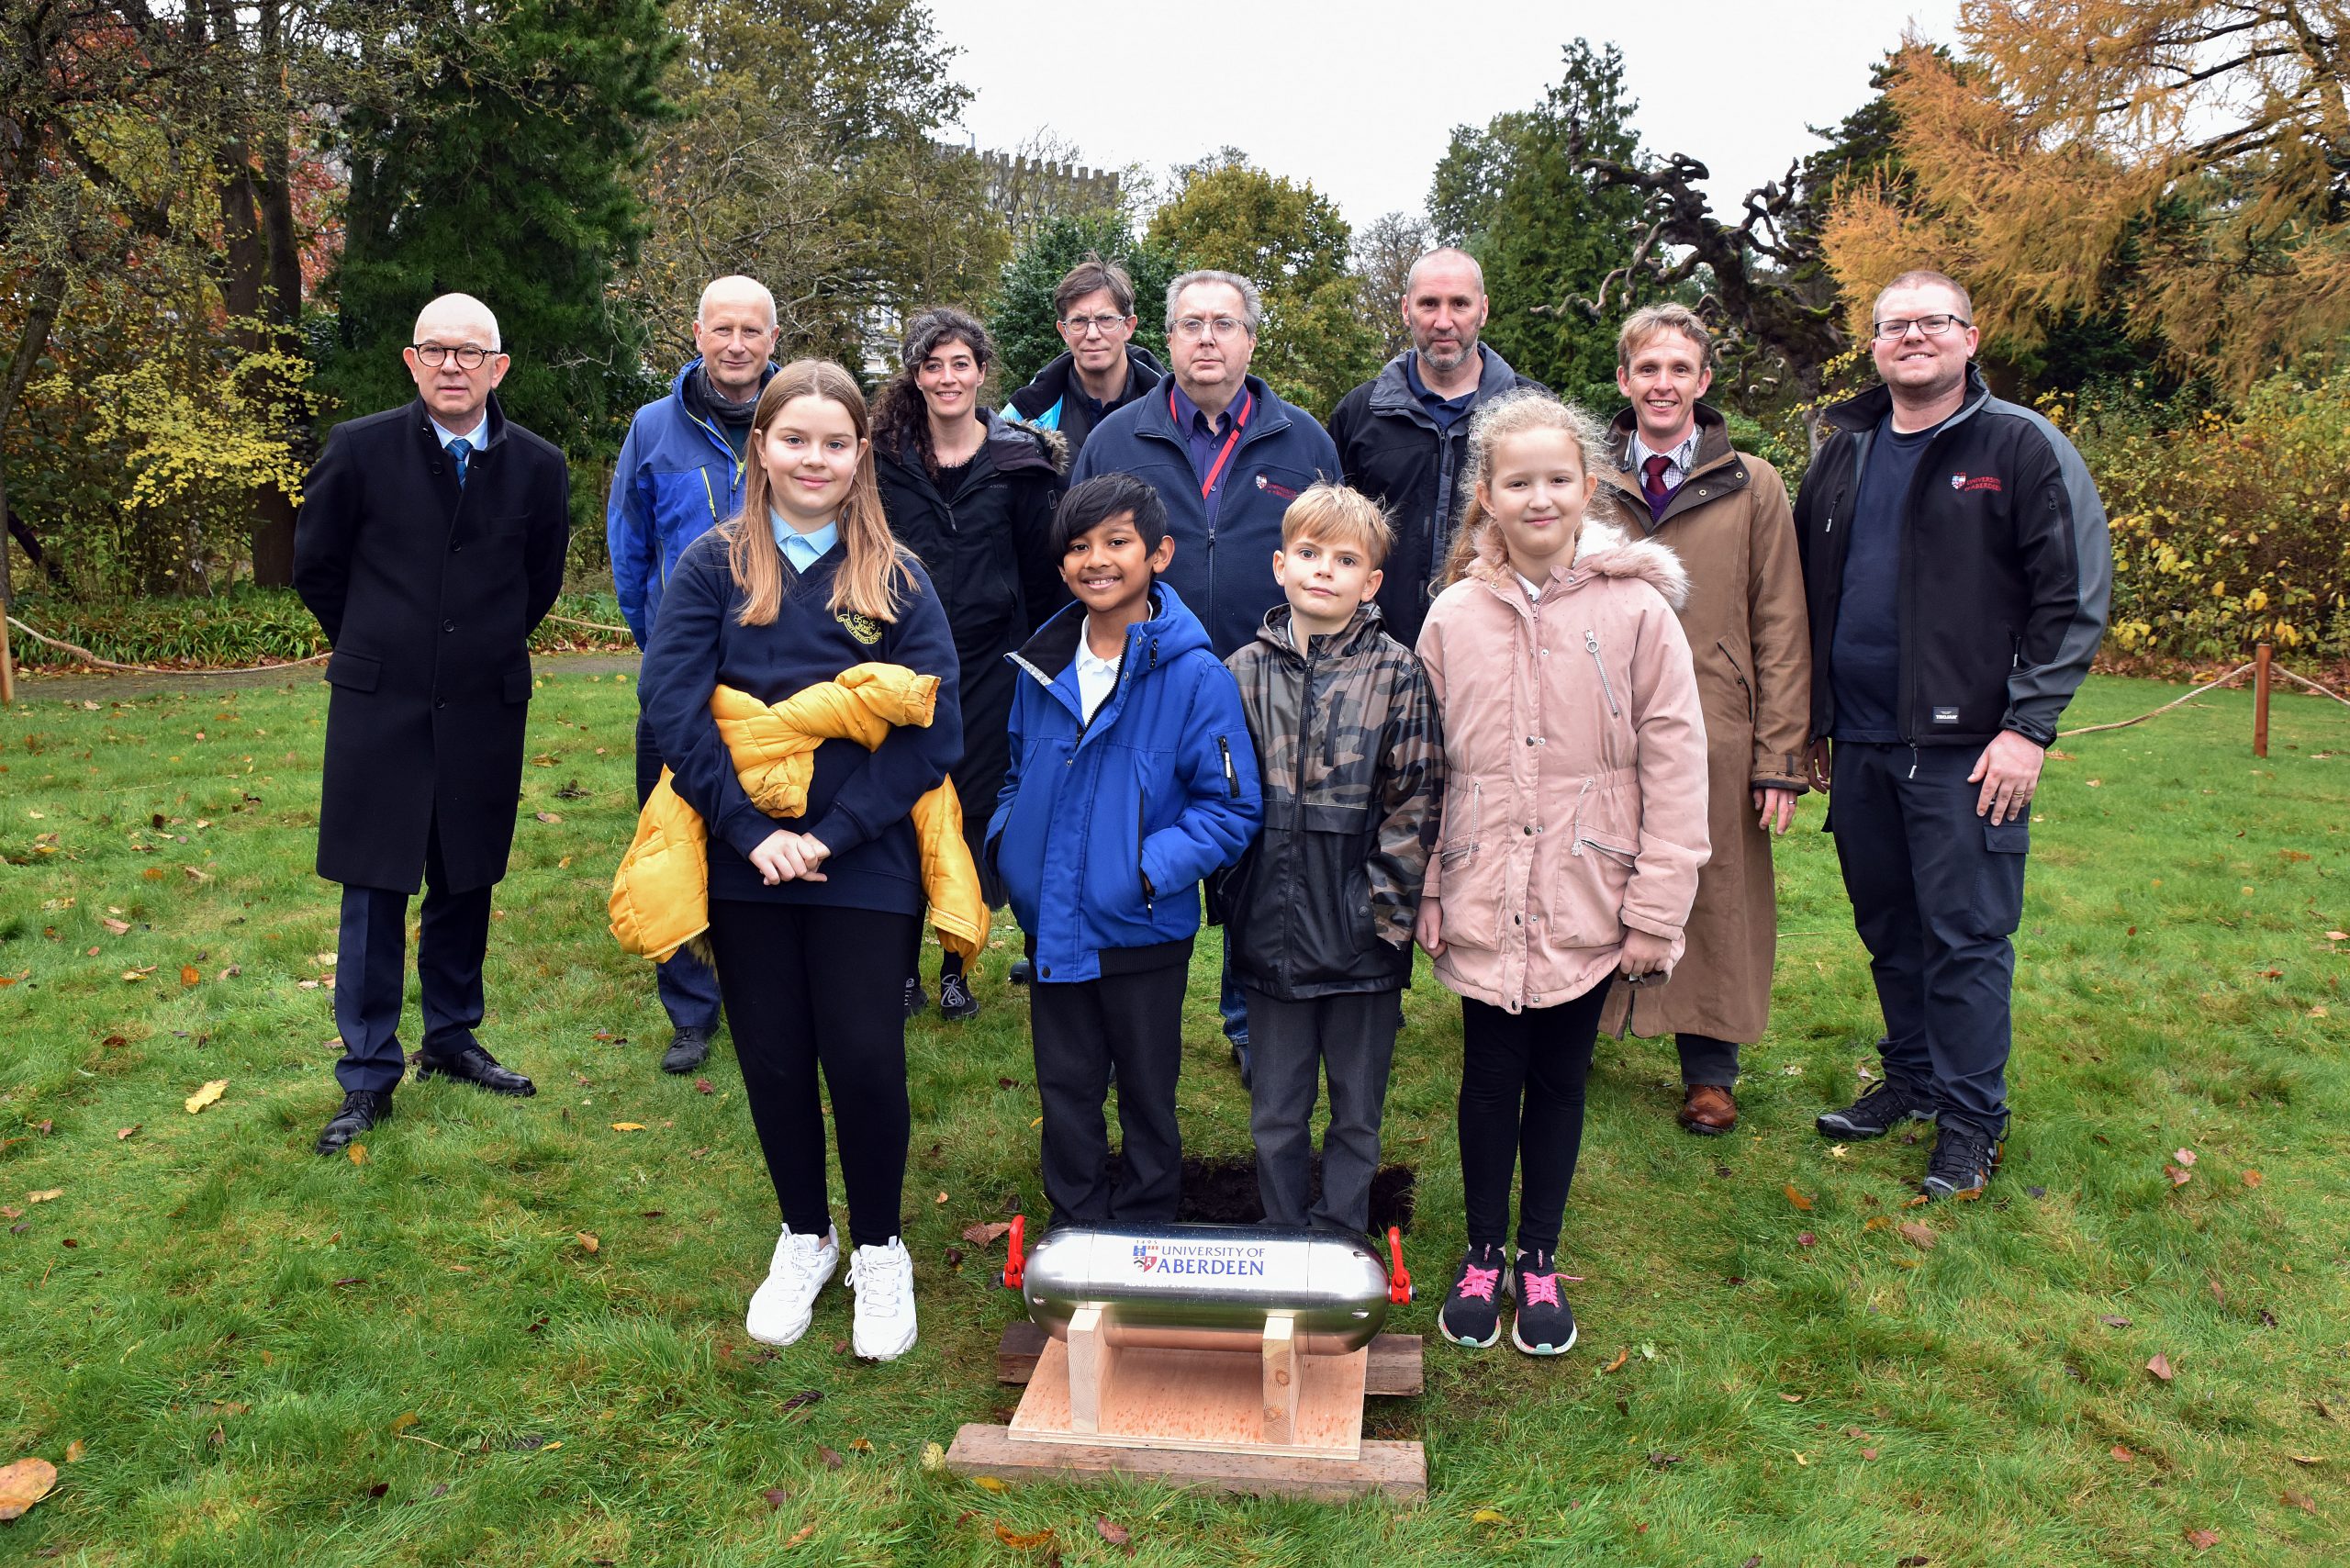 Primary school students attend the burial of a climate capsule - News